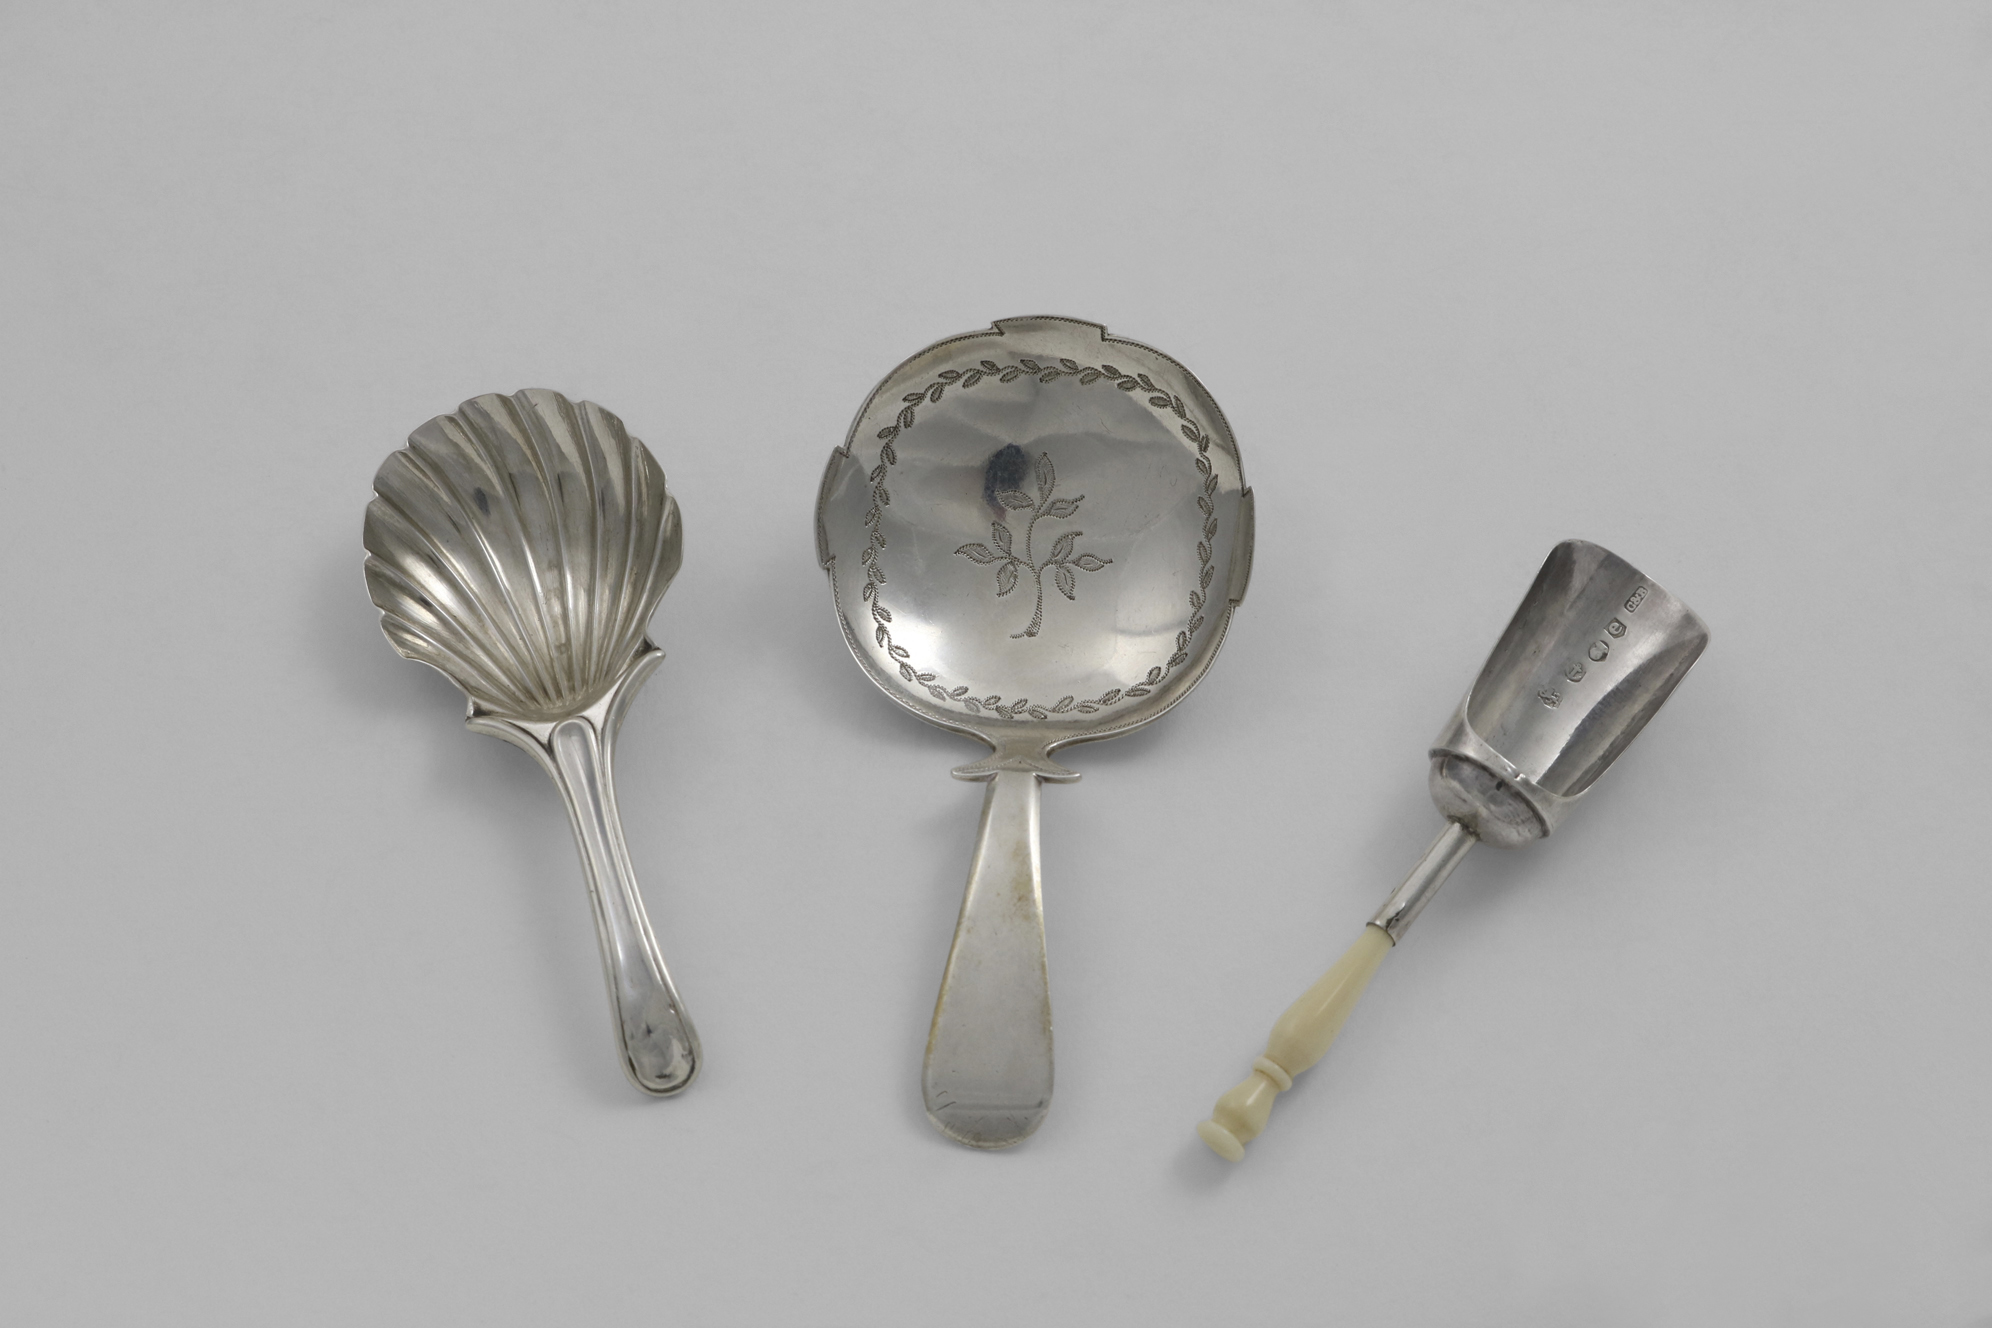 A GEORGE III CADDY SPOON with shoulders, a shaped circular bowl and engraving, by Edward